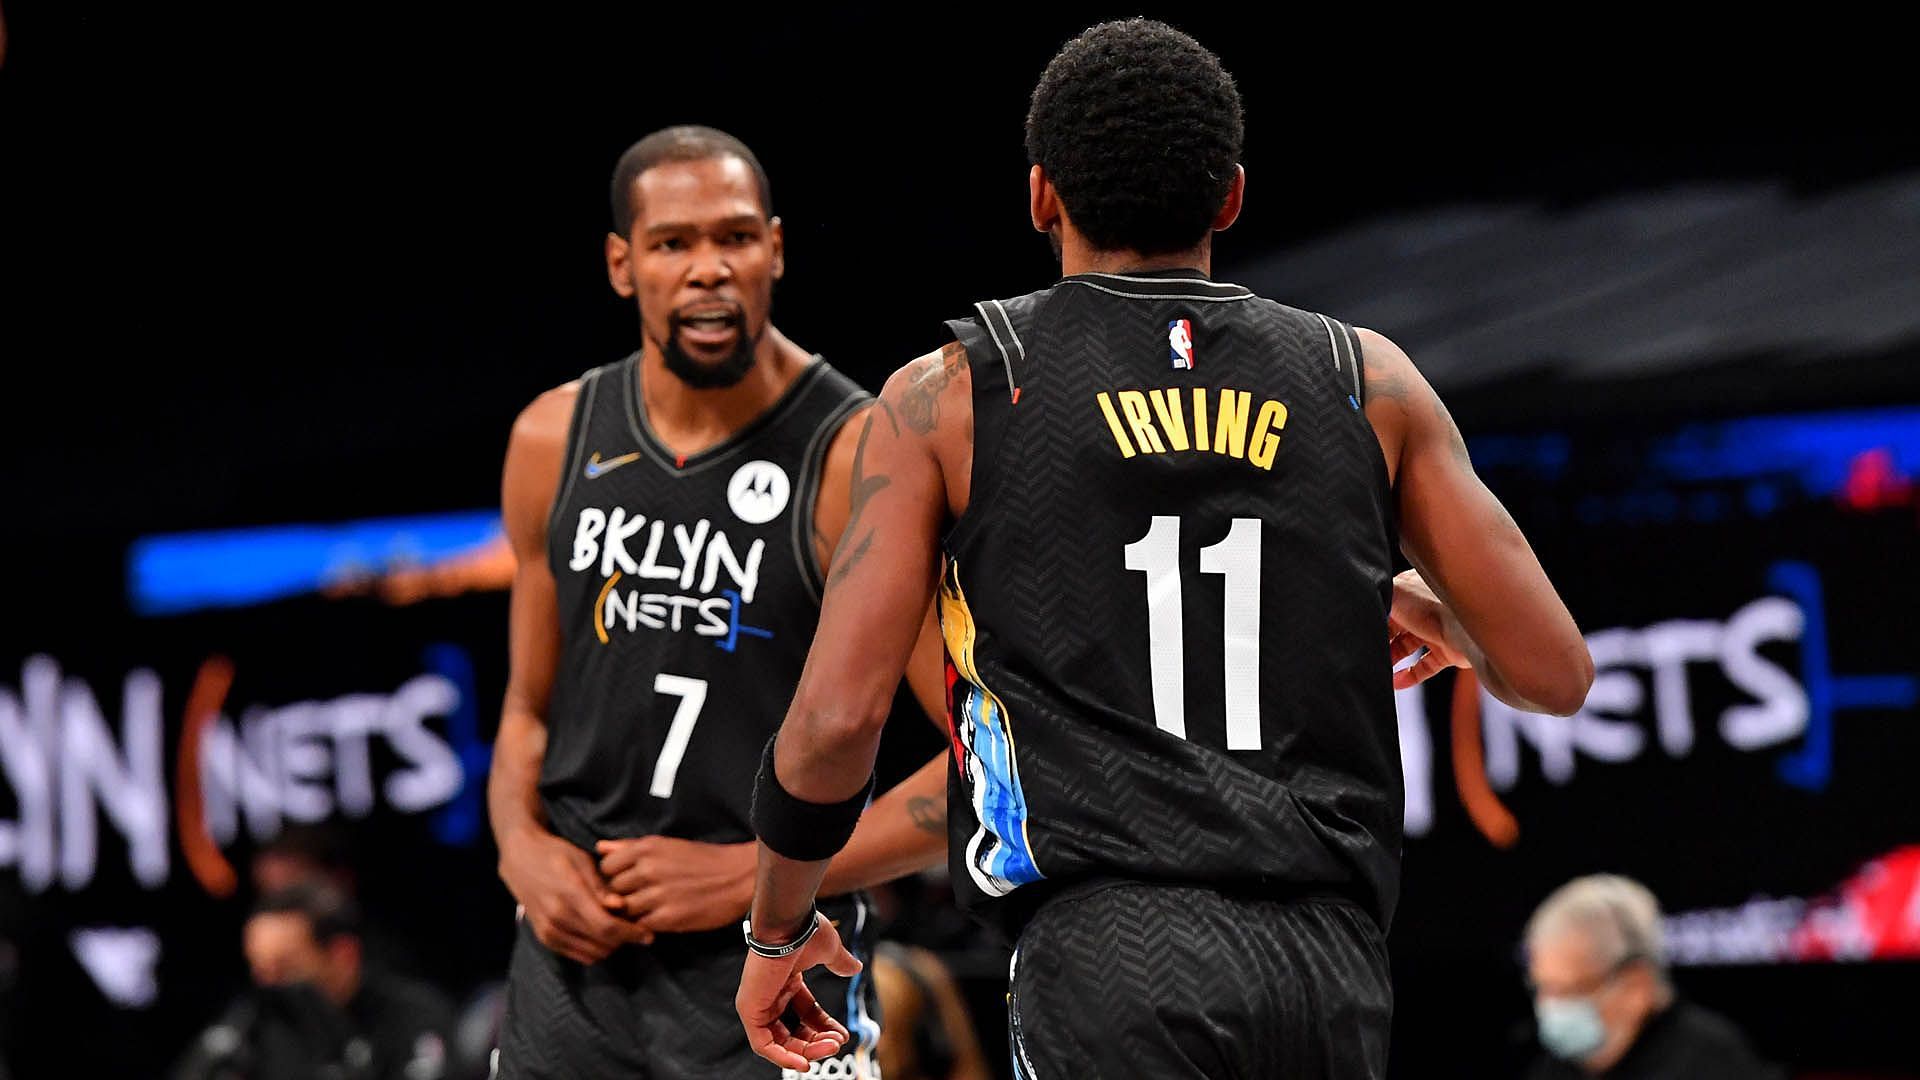 Kyrie Irving and Kevin Durant have scored at least 50 points this week. [Photo: NBA.com]